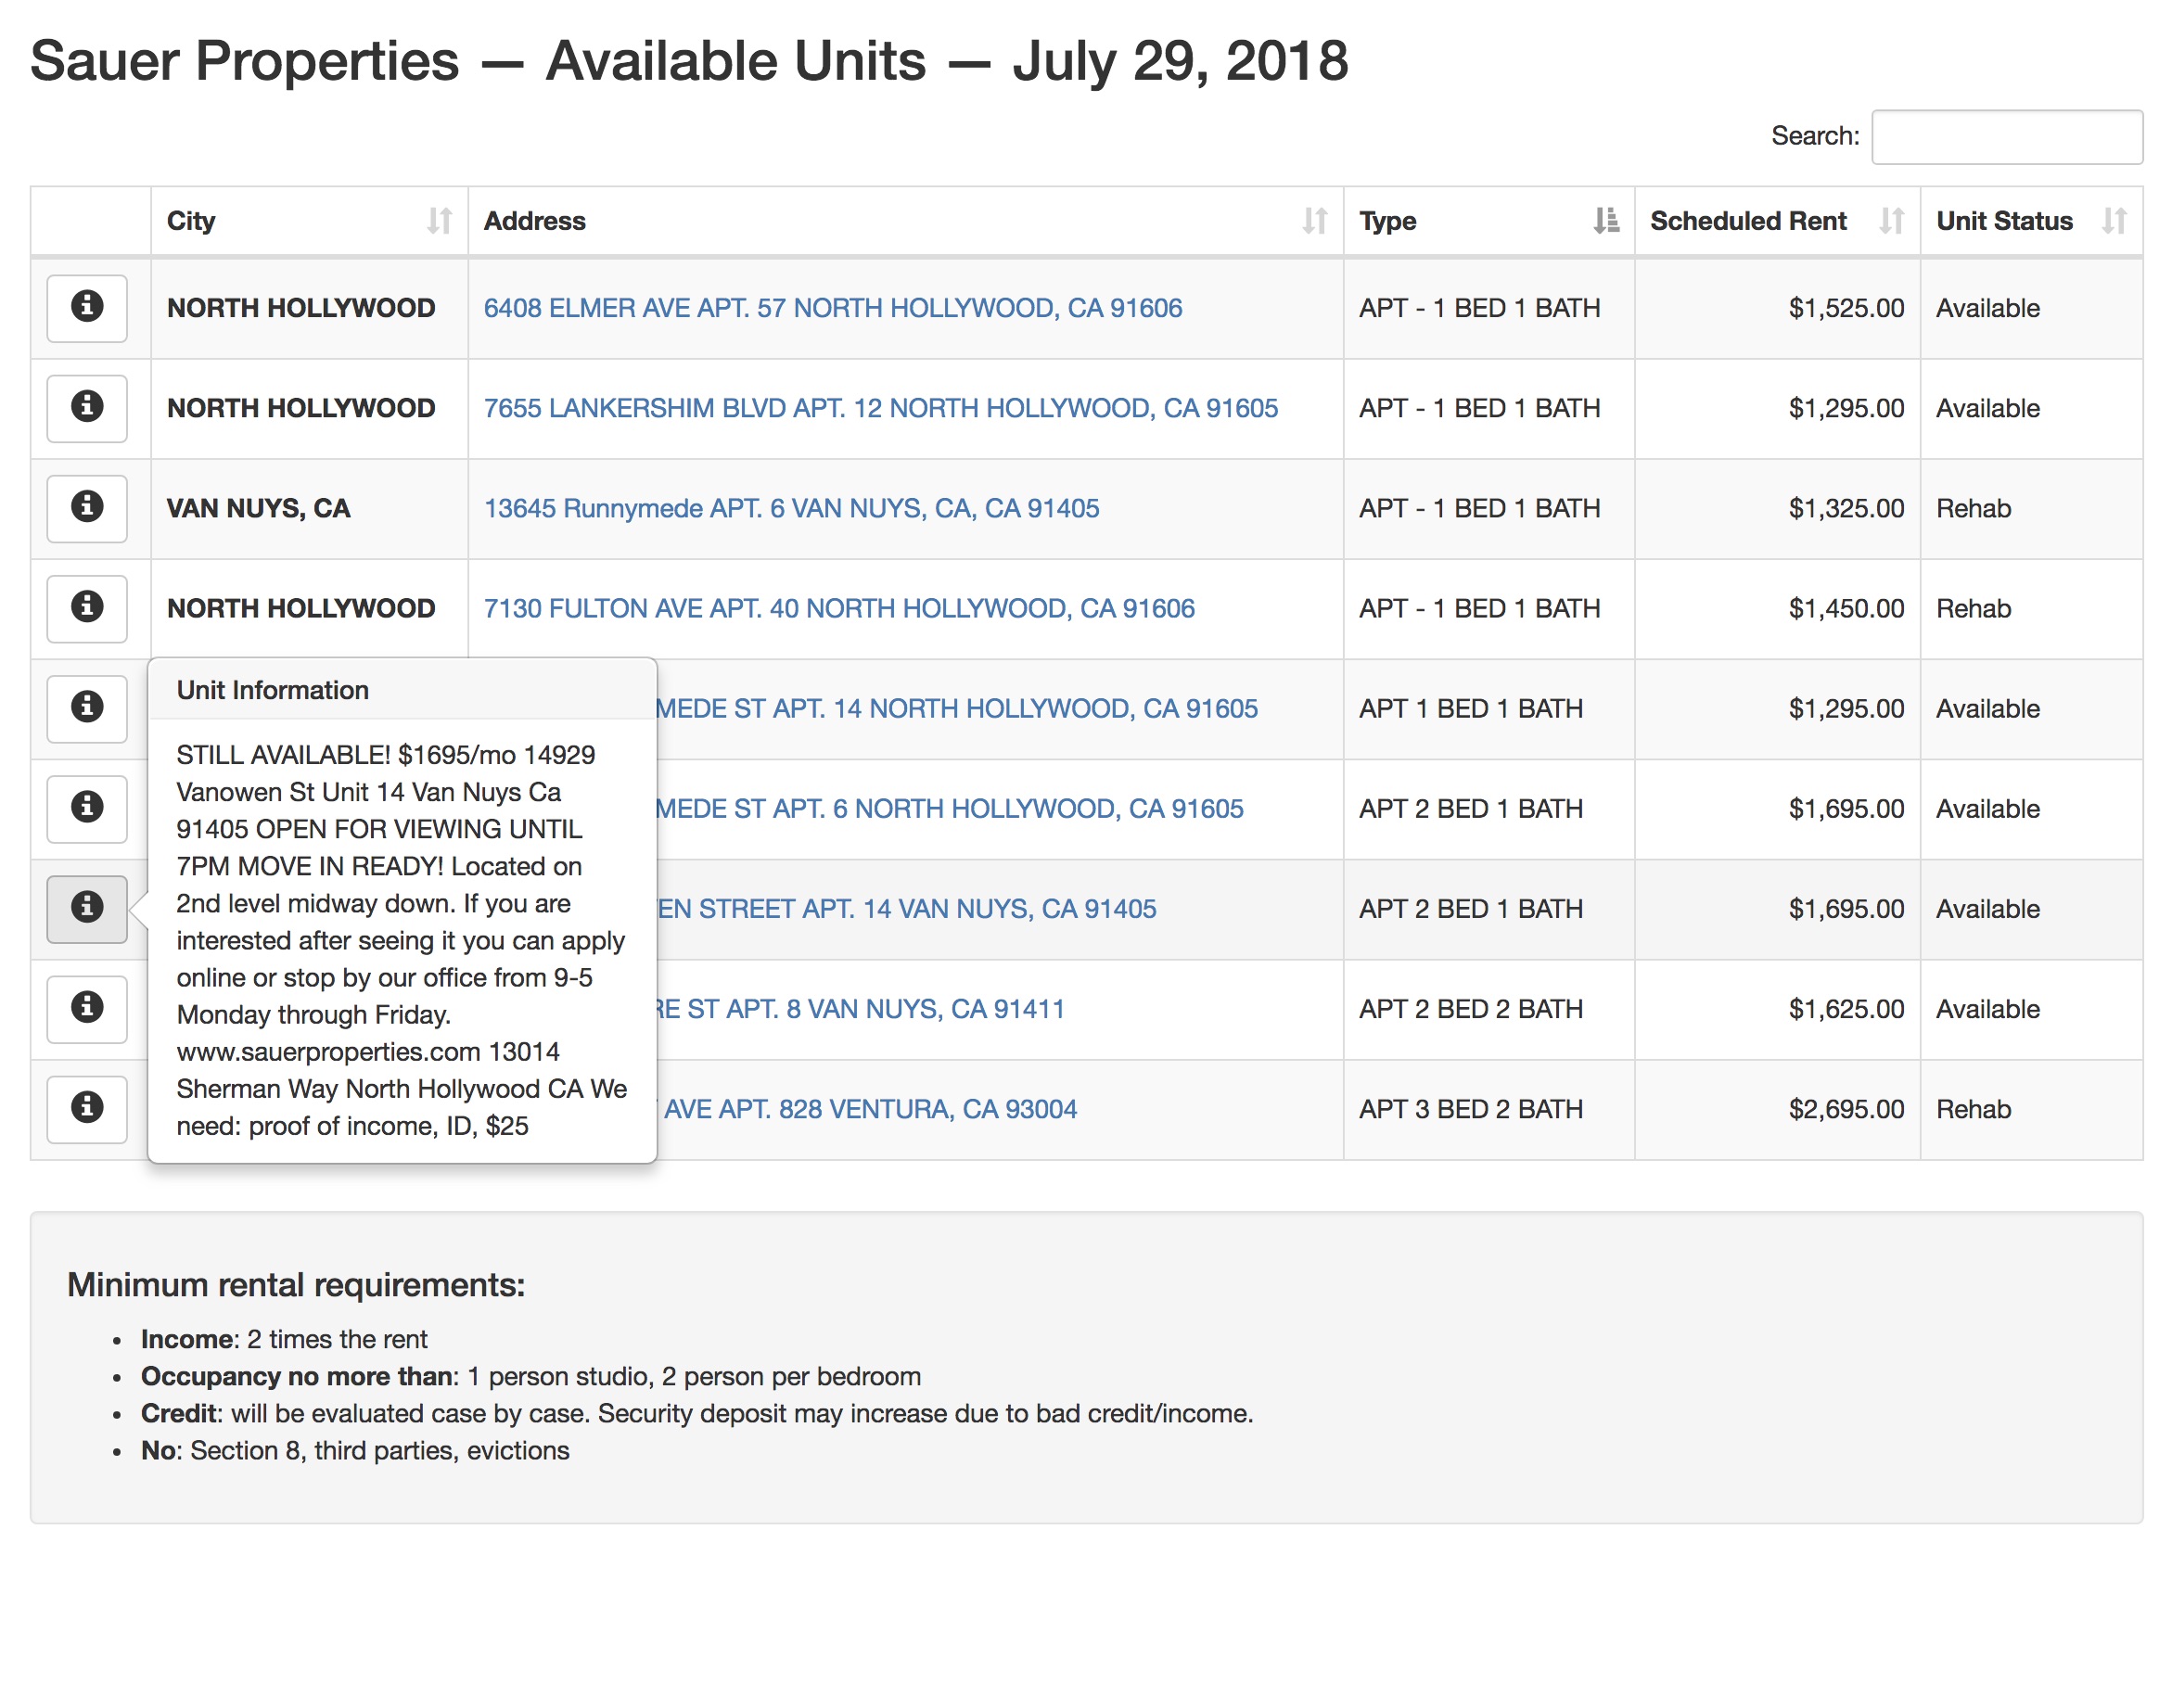 Sauer Properties FileMaker Residential Rental Property Mangement -- Available Units